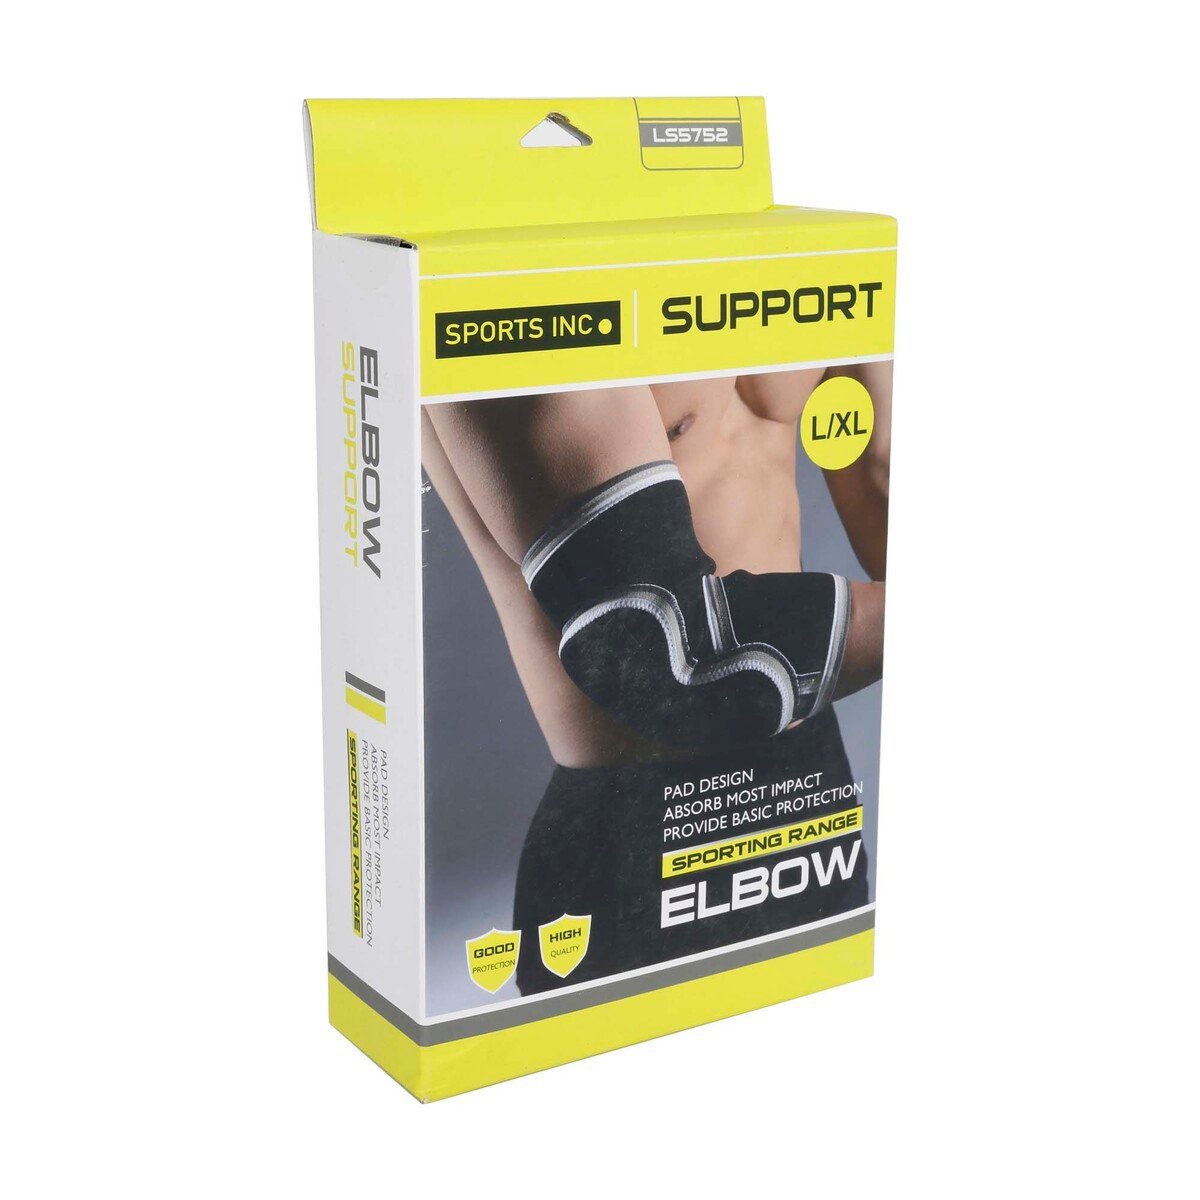 Sports Inc Elbow Support, Large, LS5752